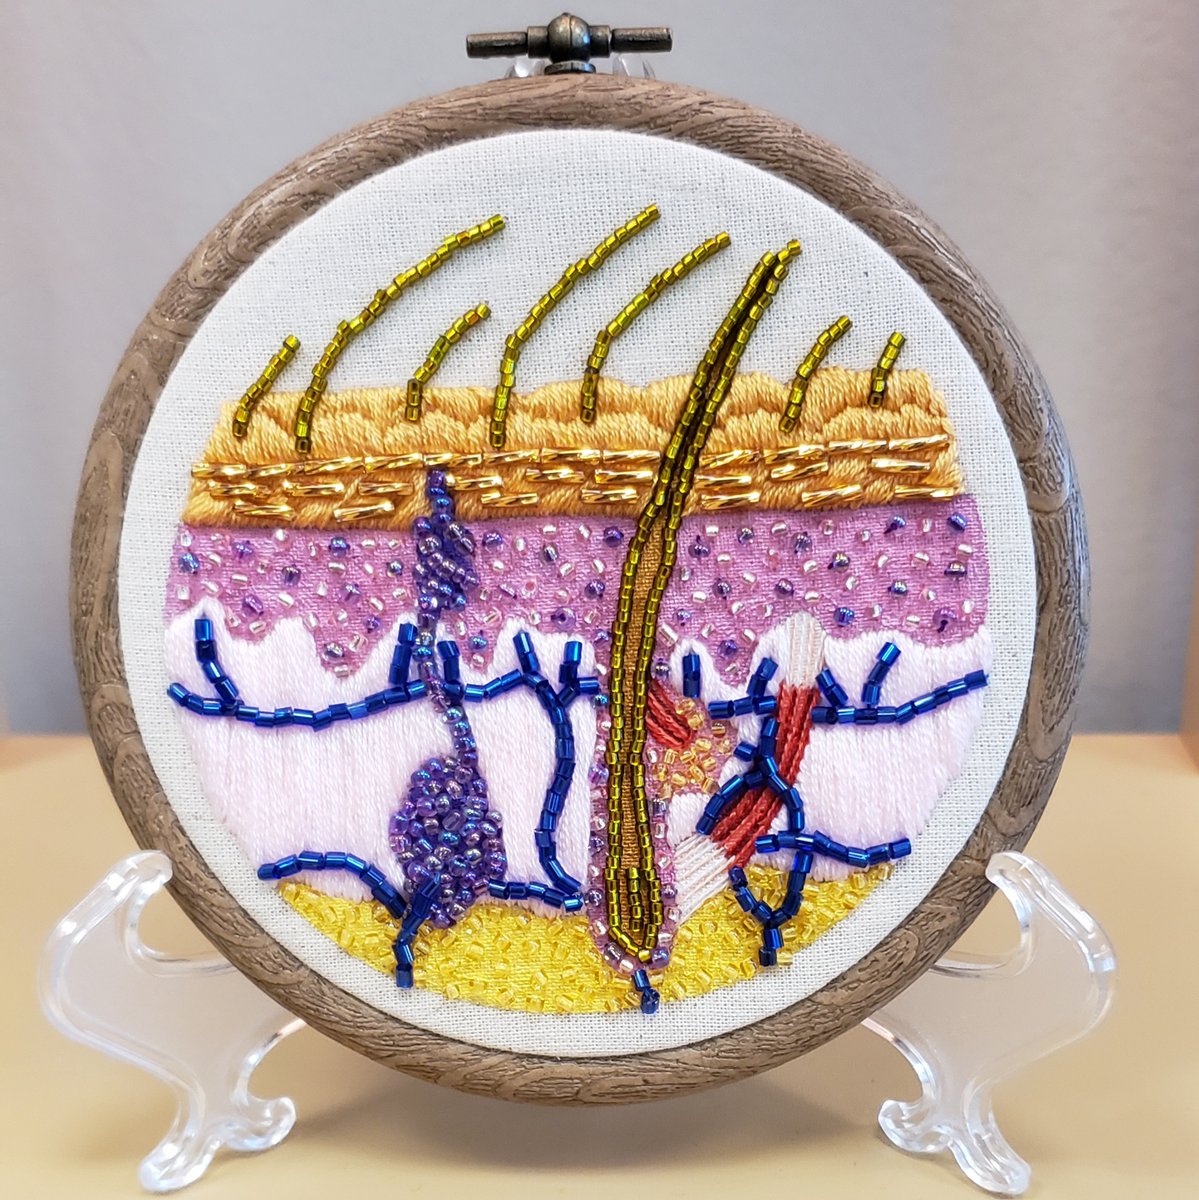 What better present could a lover of #dermpath and #histology ask for? 

Such an awesome addition to my office decor 😍

ambroidering.com
#anatomy #embroidery #anatomicalart #pathart #dermatology #pathology